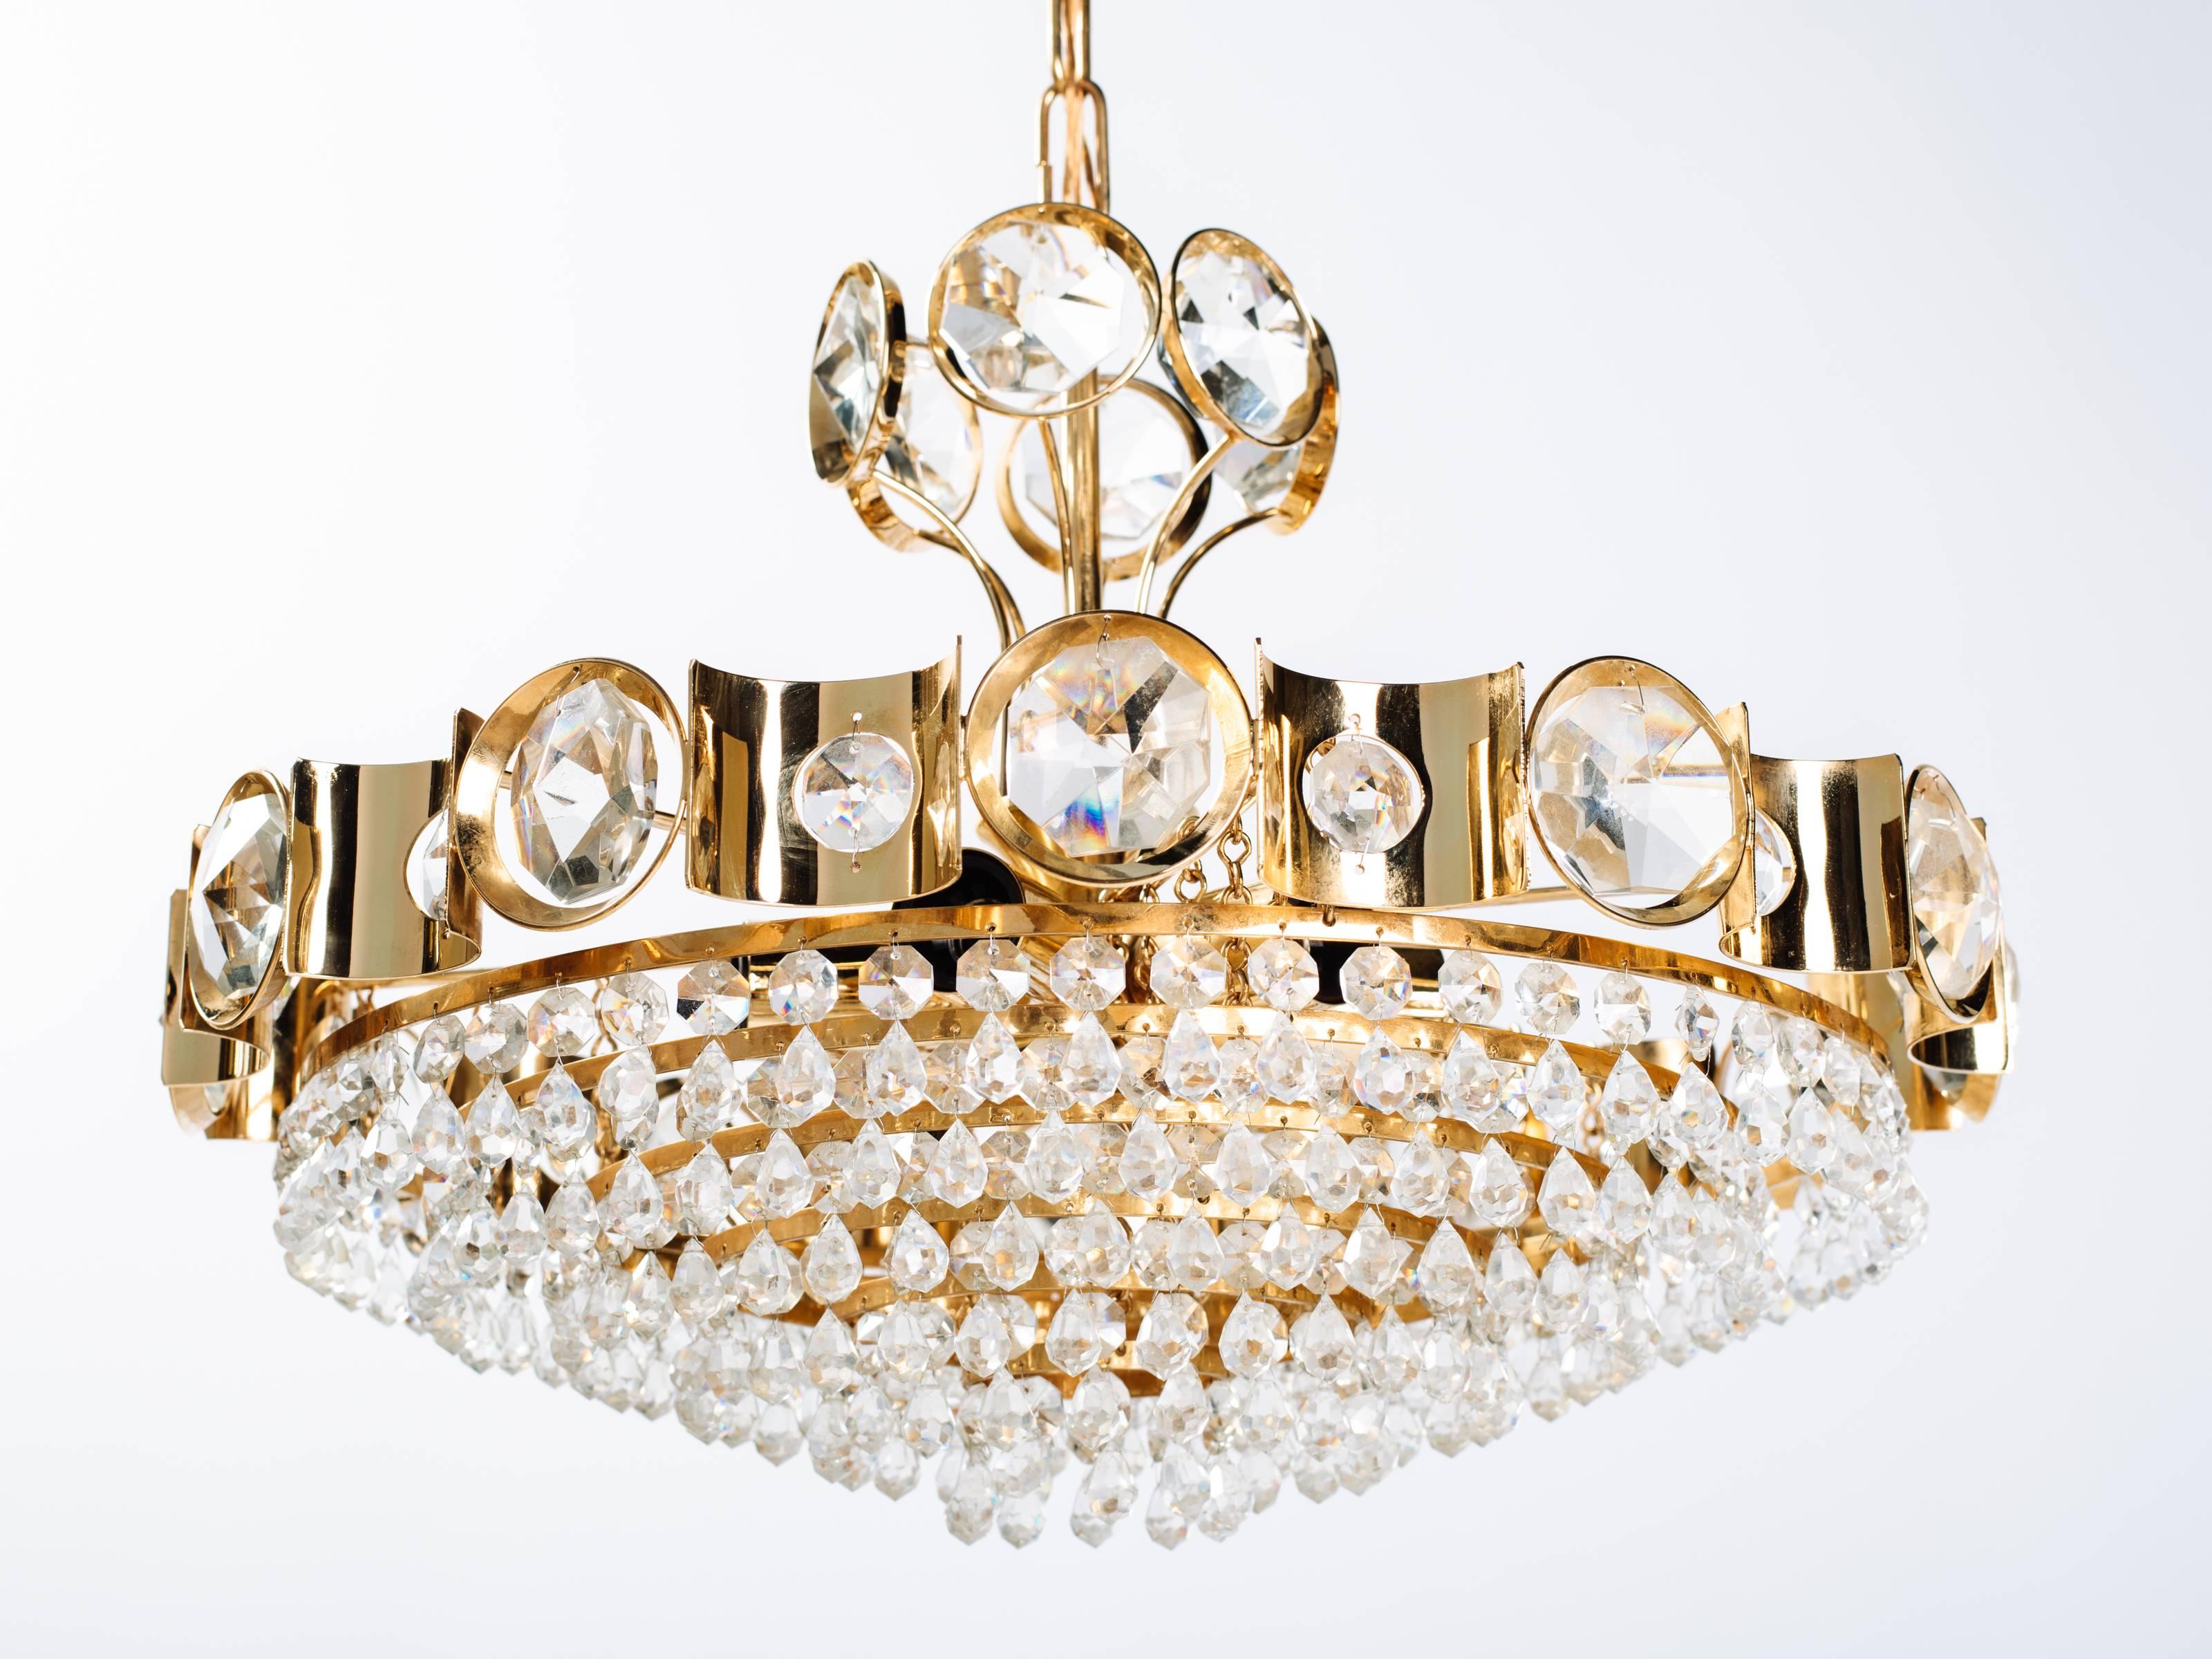 Lobmeyr Gold Plated Brass and Cut Crystal Chandelier, circa 1960s For Sale 1